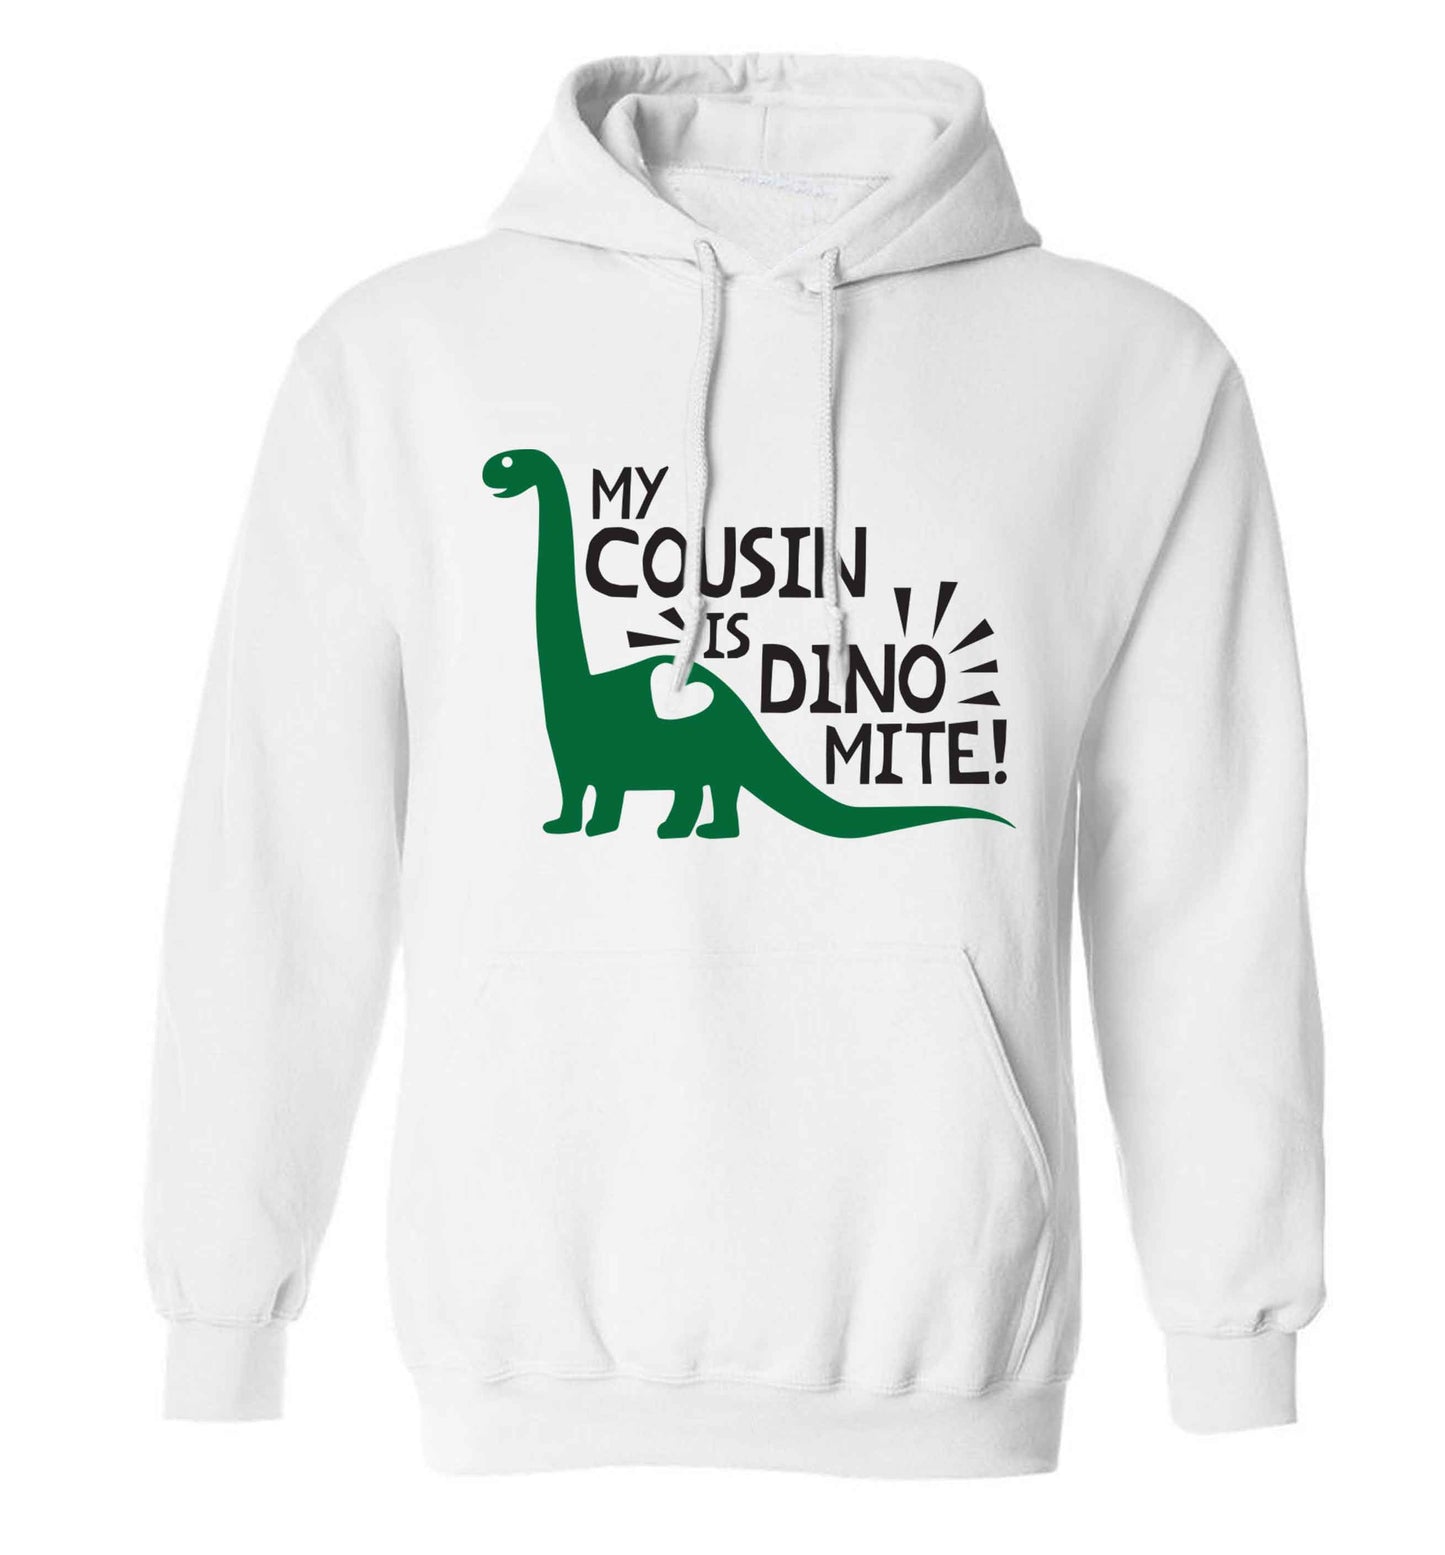 My cousin is dinomite! adults unisex white hoodie 2XL